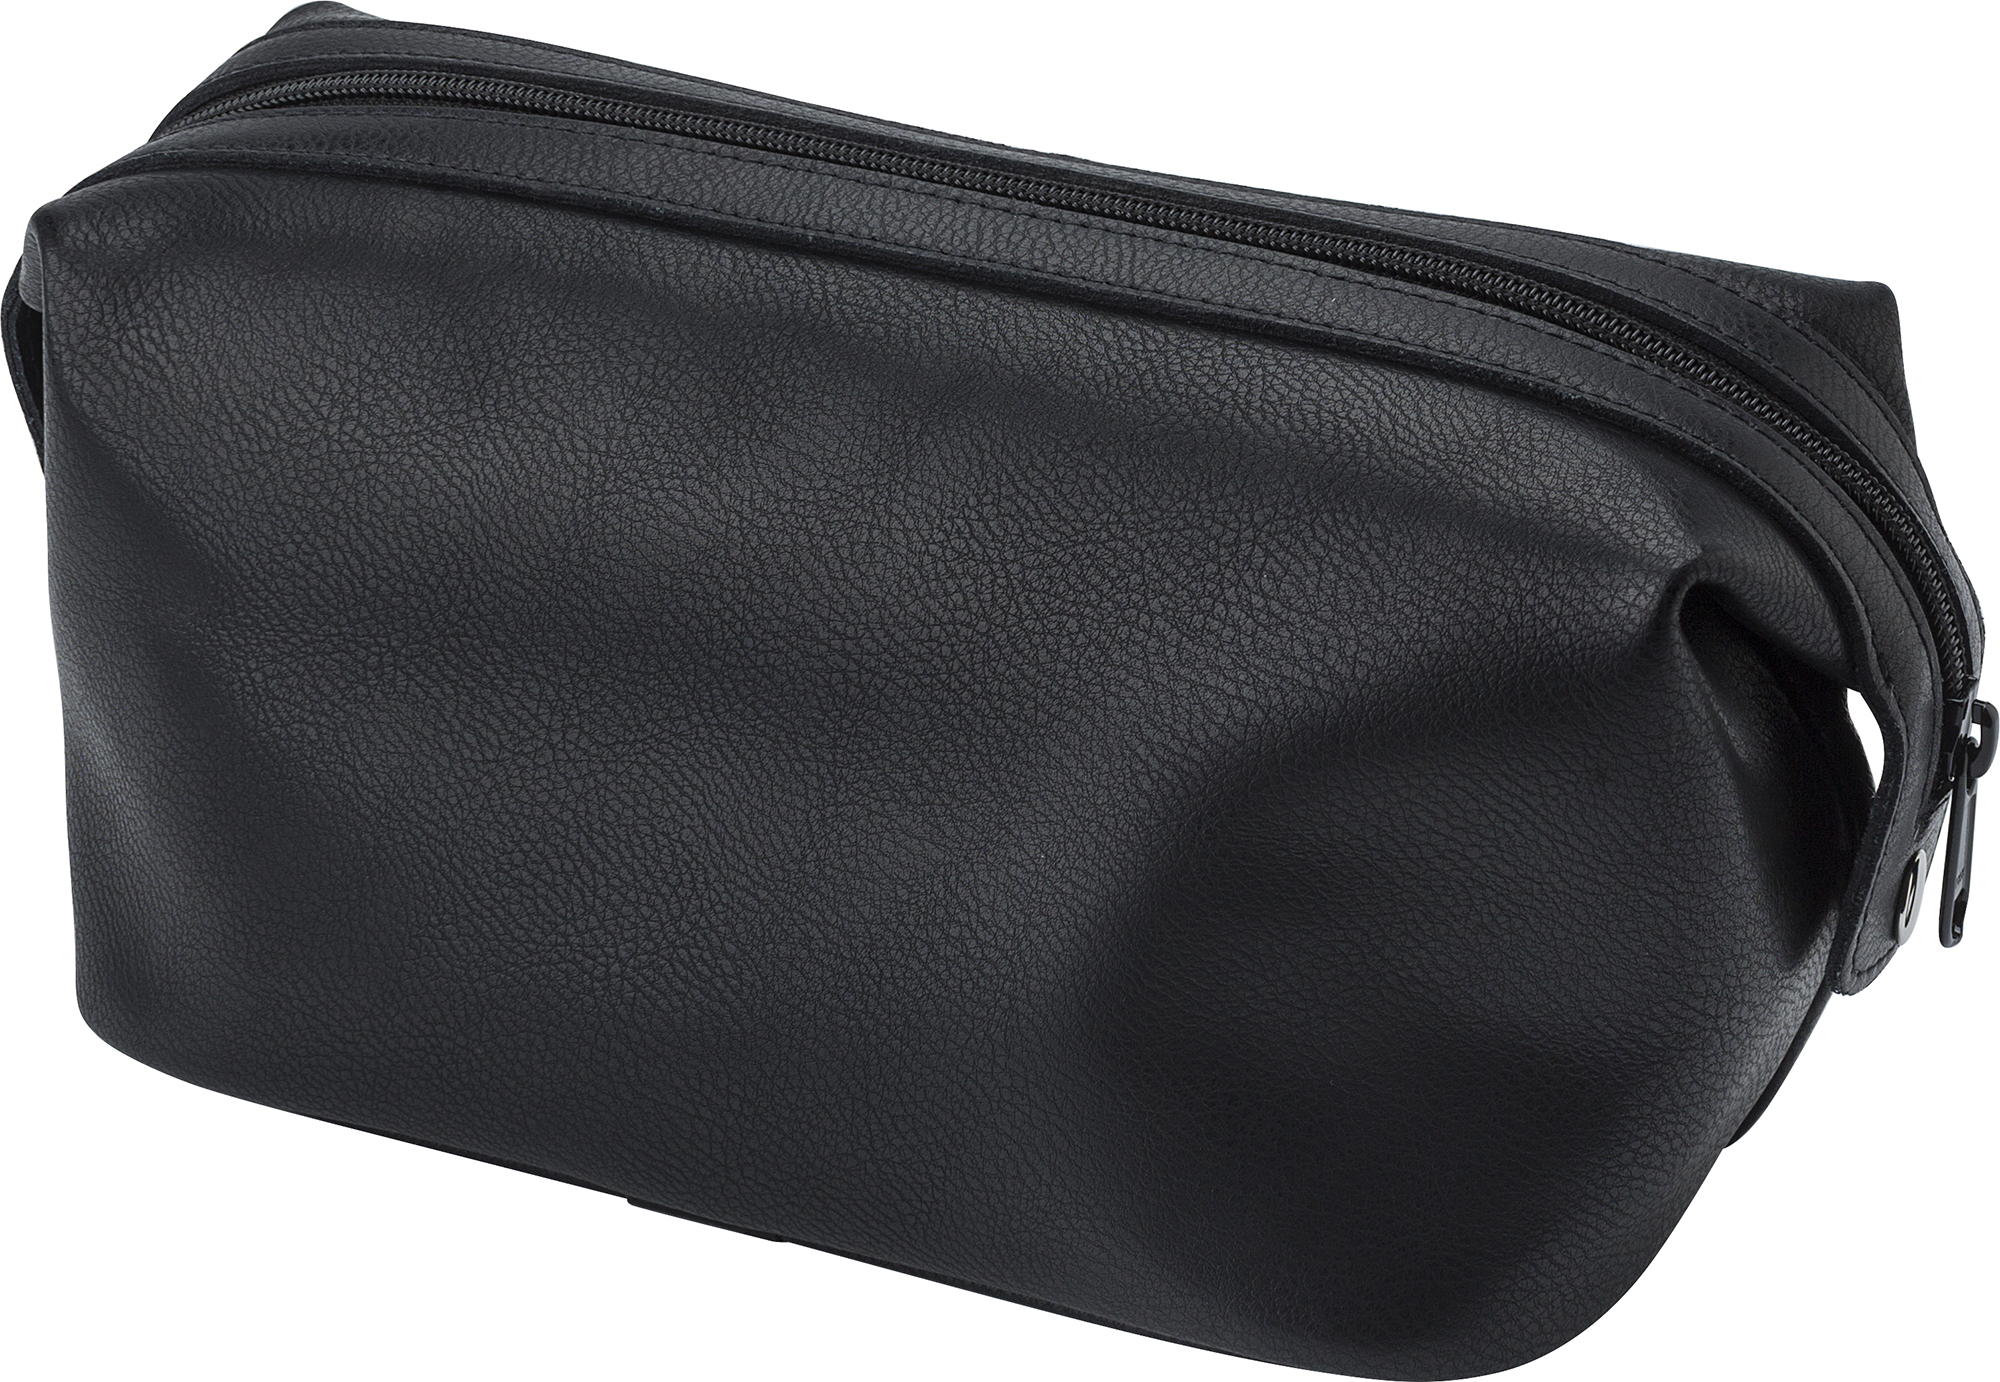 000000971810 001999999 3d045 rgt pro01 2023 fal - Leather toiletry bag